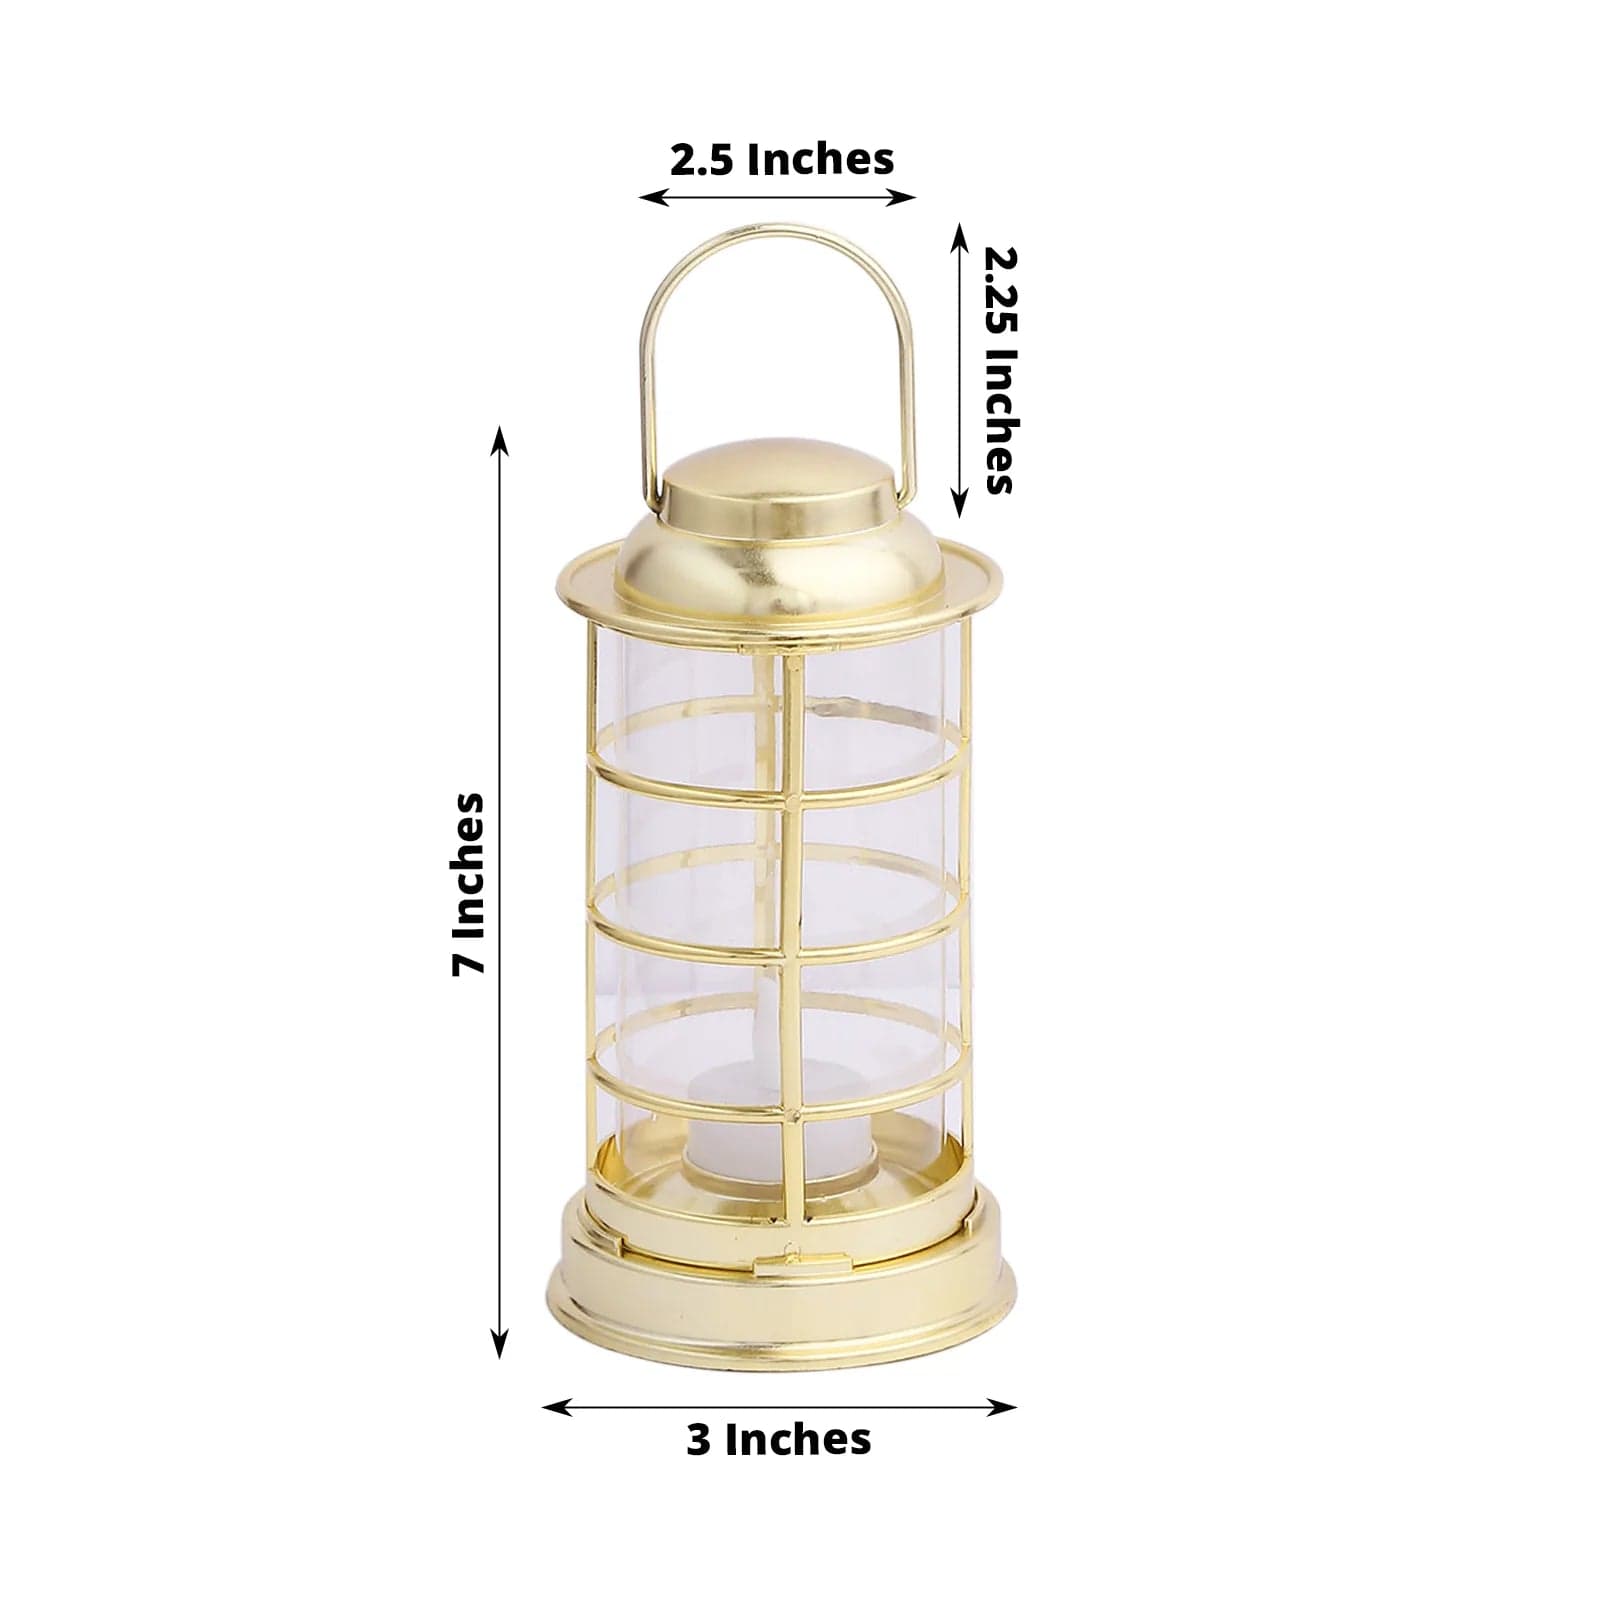 3 Gold 7 in Plastic Mini Lantern Lamps with Battery Operated LED Tealight Candles